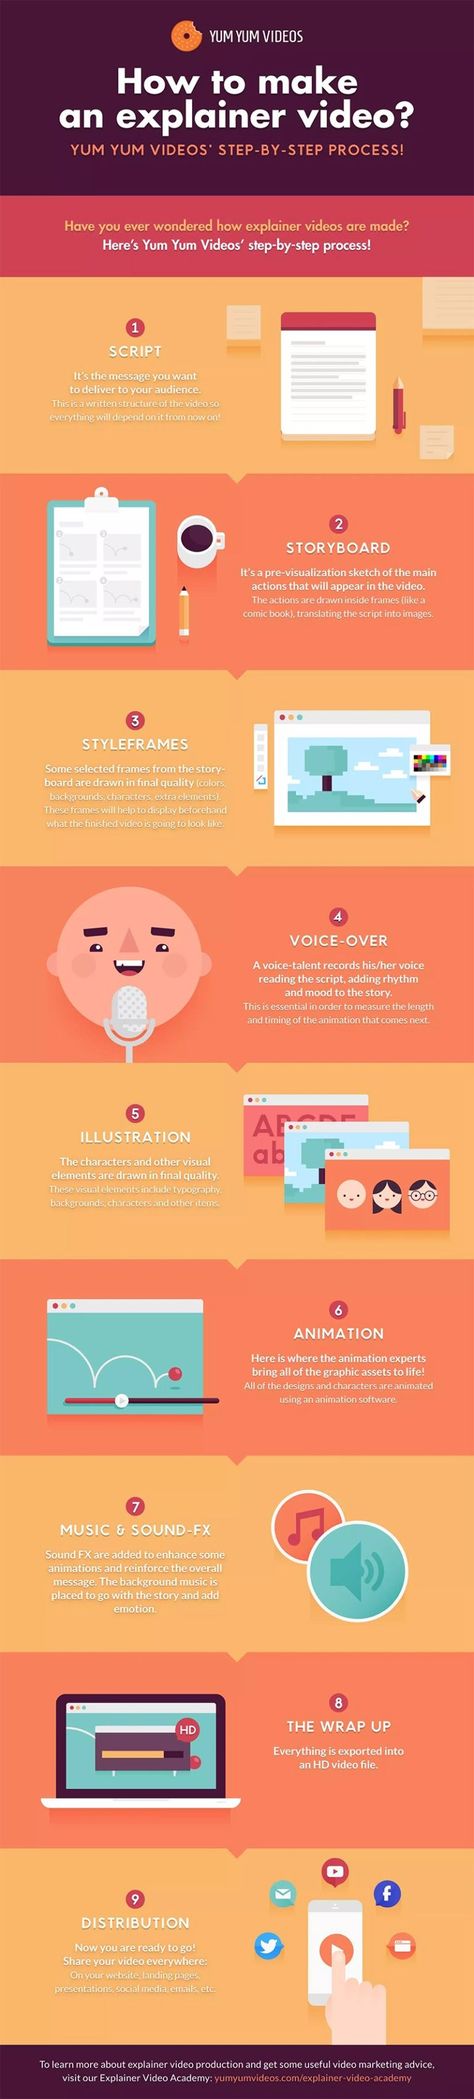 How to Make an Explainer Video: 9 Steps to Video Content Success [Infographic] Content Marketing, Internet Marketing, Web Design, Inbound Marketing, Internet Income, Online Marketing, Youtube Marketing, Marketing Strategy, Process Infographic